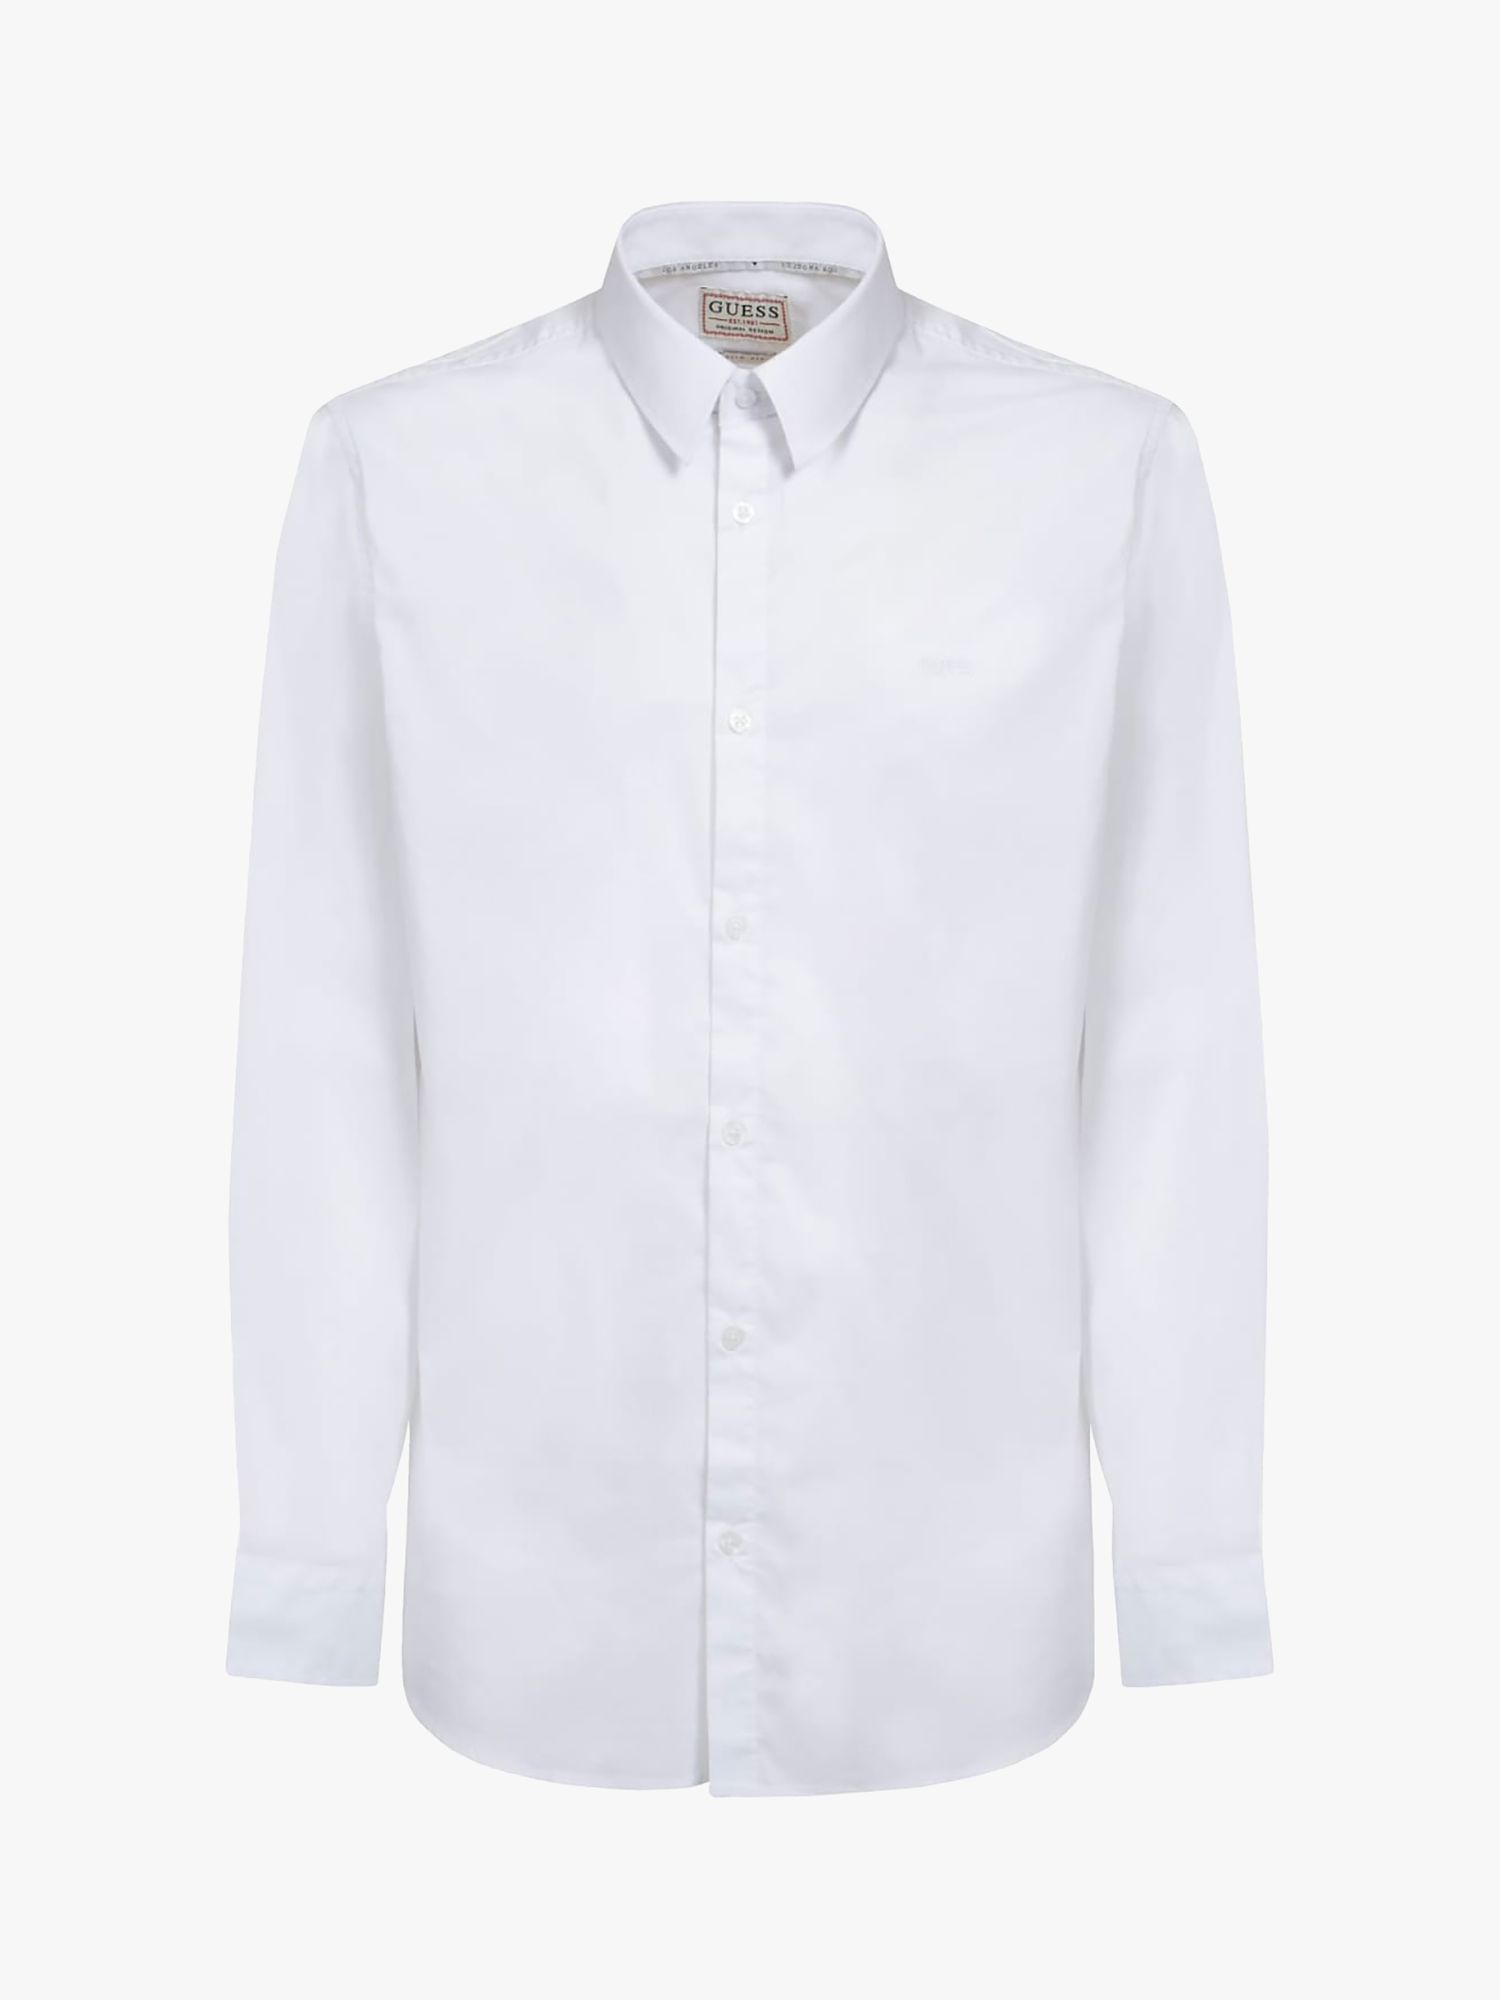 GUESS Long Sleeve Sunset Shirt, Pure White at John Lewis & Partners